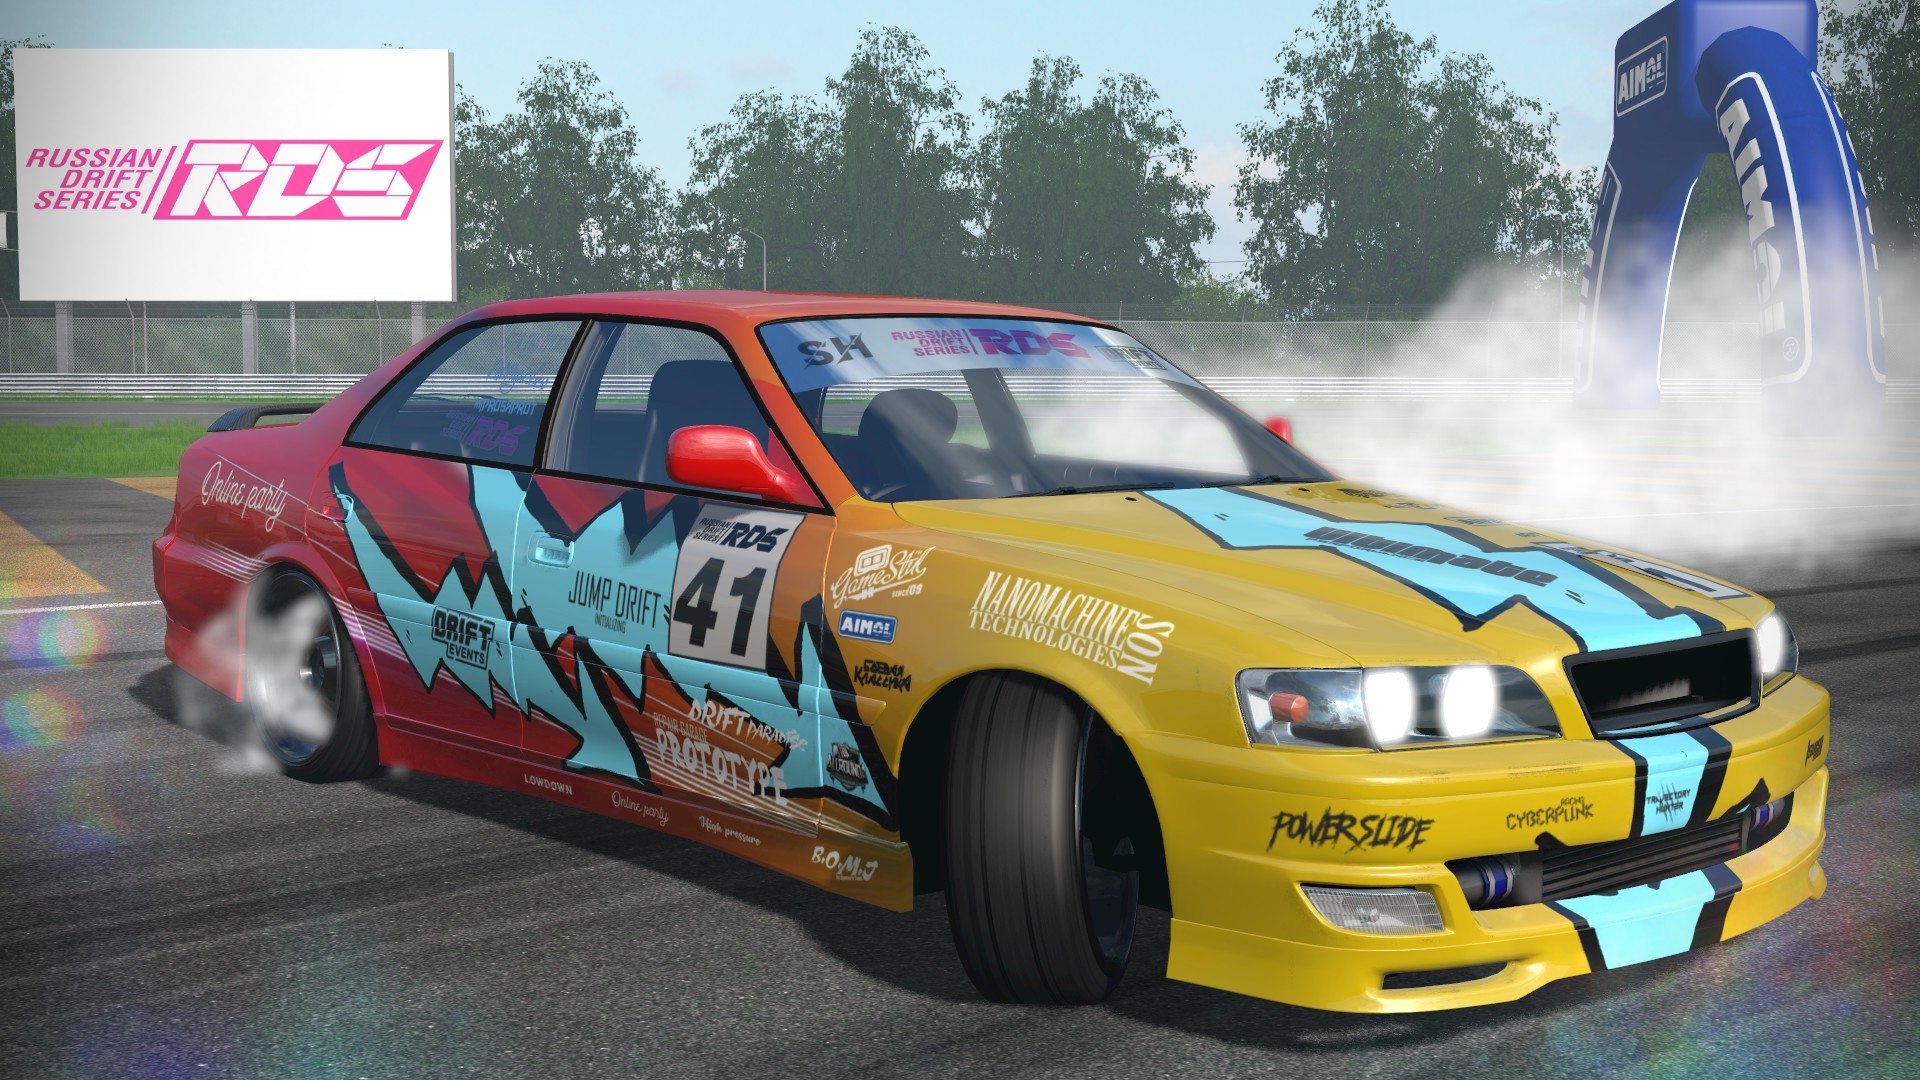 Игры дрифт ваз. RDS дрифт игра. RDS the Official Drift videogame машины. Игра RDS 2. RDS — the Official Drift videogame (2019).